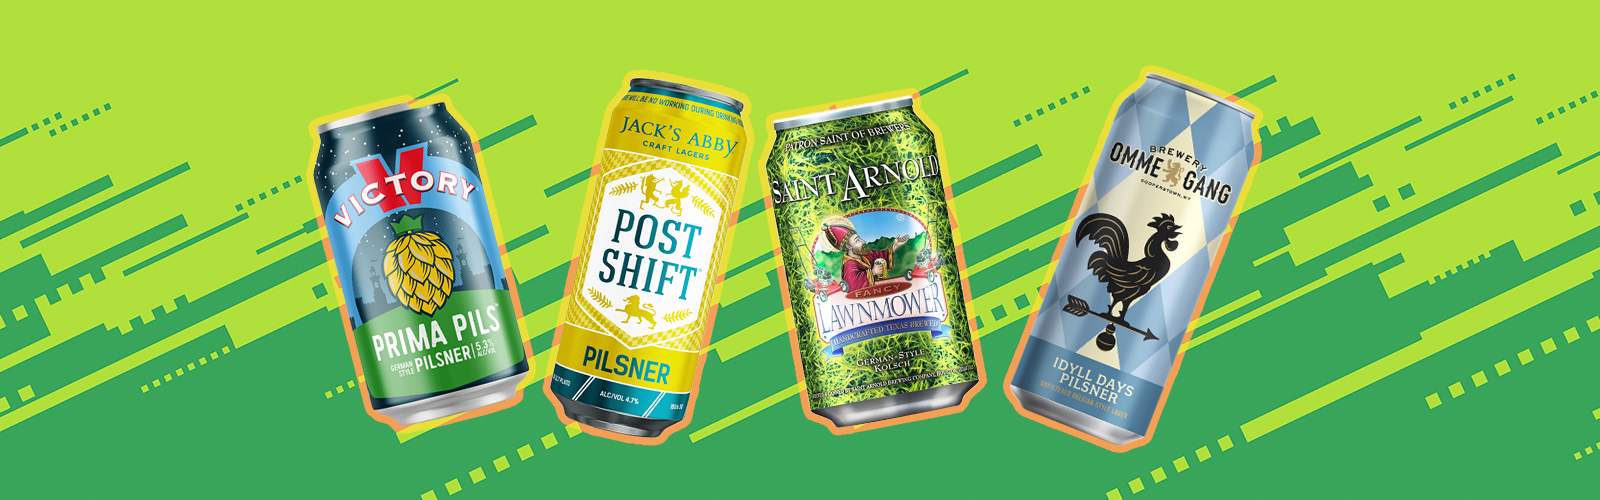 Victory/Jack's Abby/Saint Arnold/Ommegang/istock/Uproxx